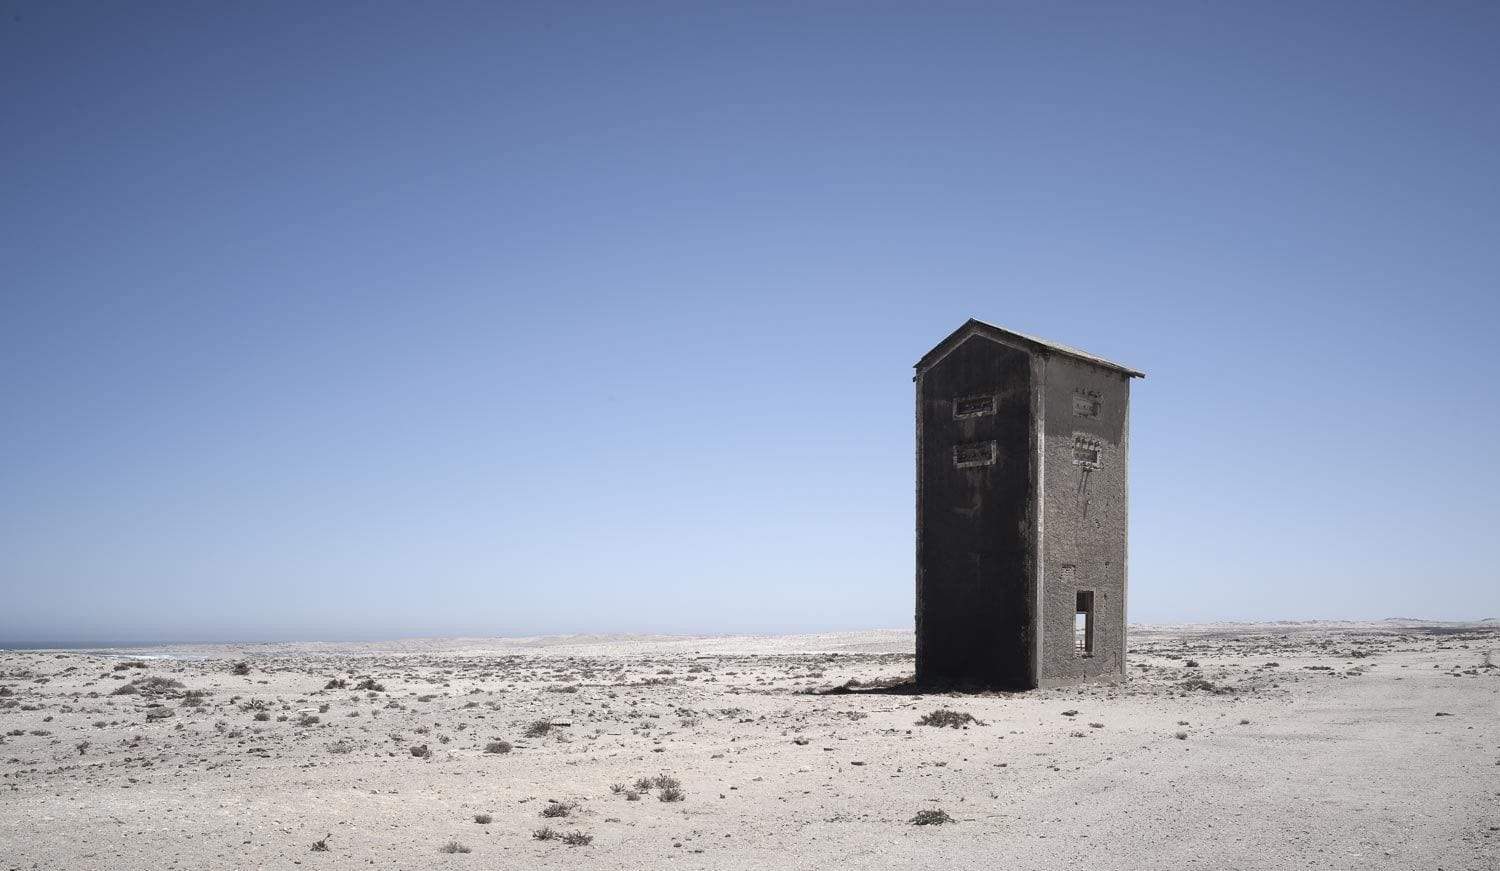 A wooden chamber in a desert, Namibia #6